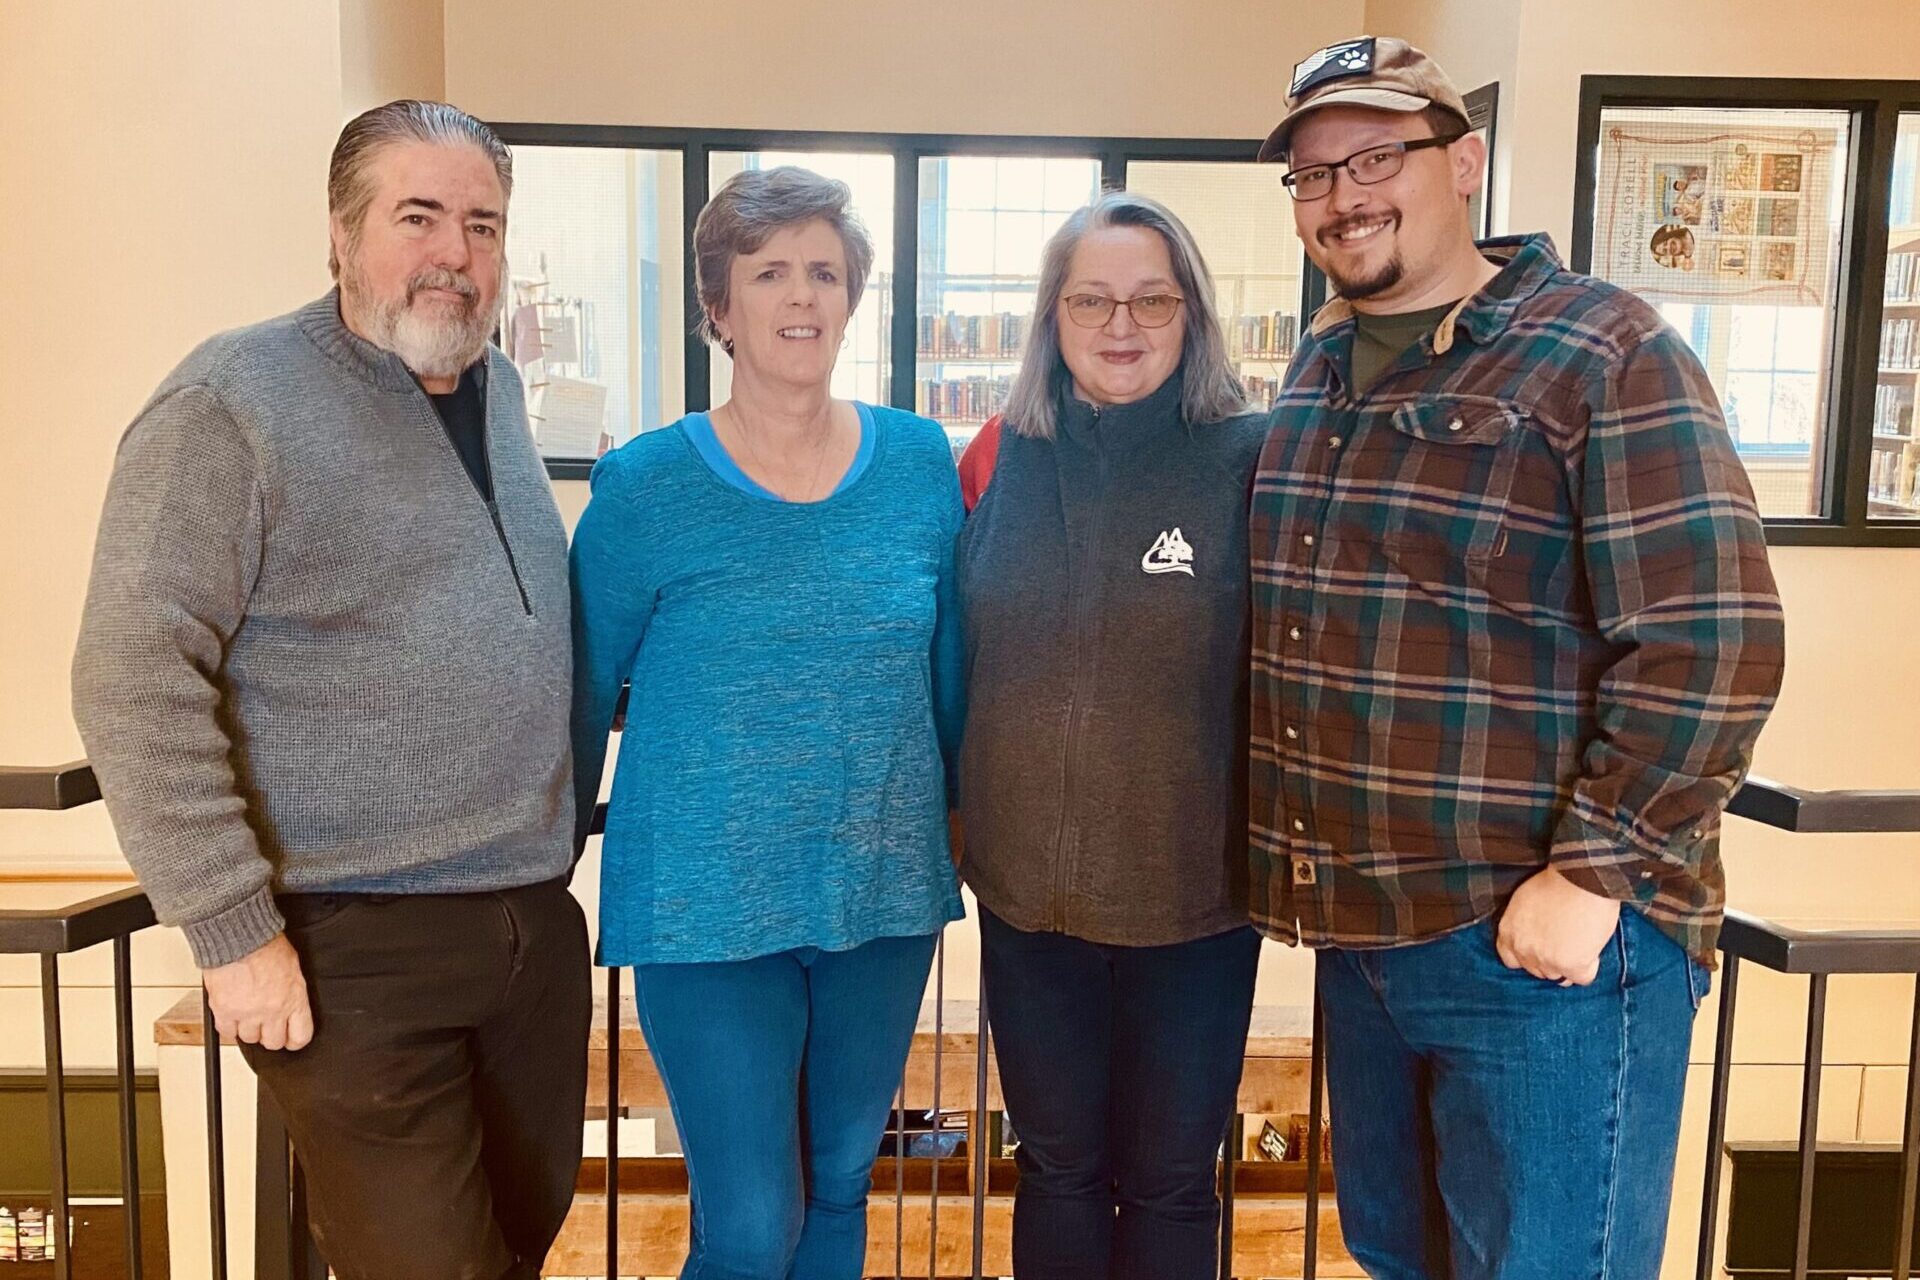 From left to right: President Dave Reeder, Vice President Tammy Hardy, Secretary Martine Miller and Treasurer Brian Brumbaugh